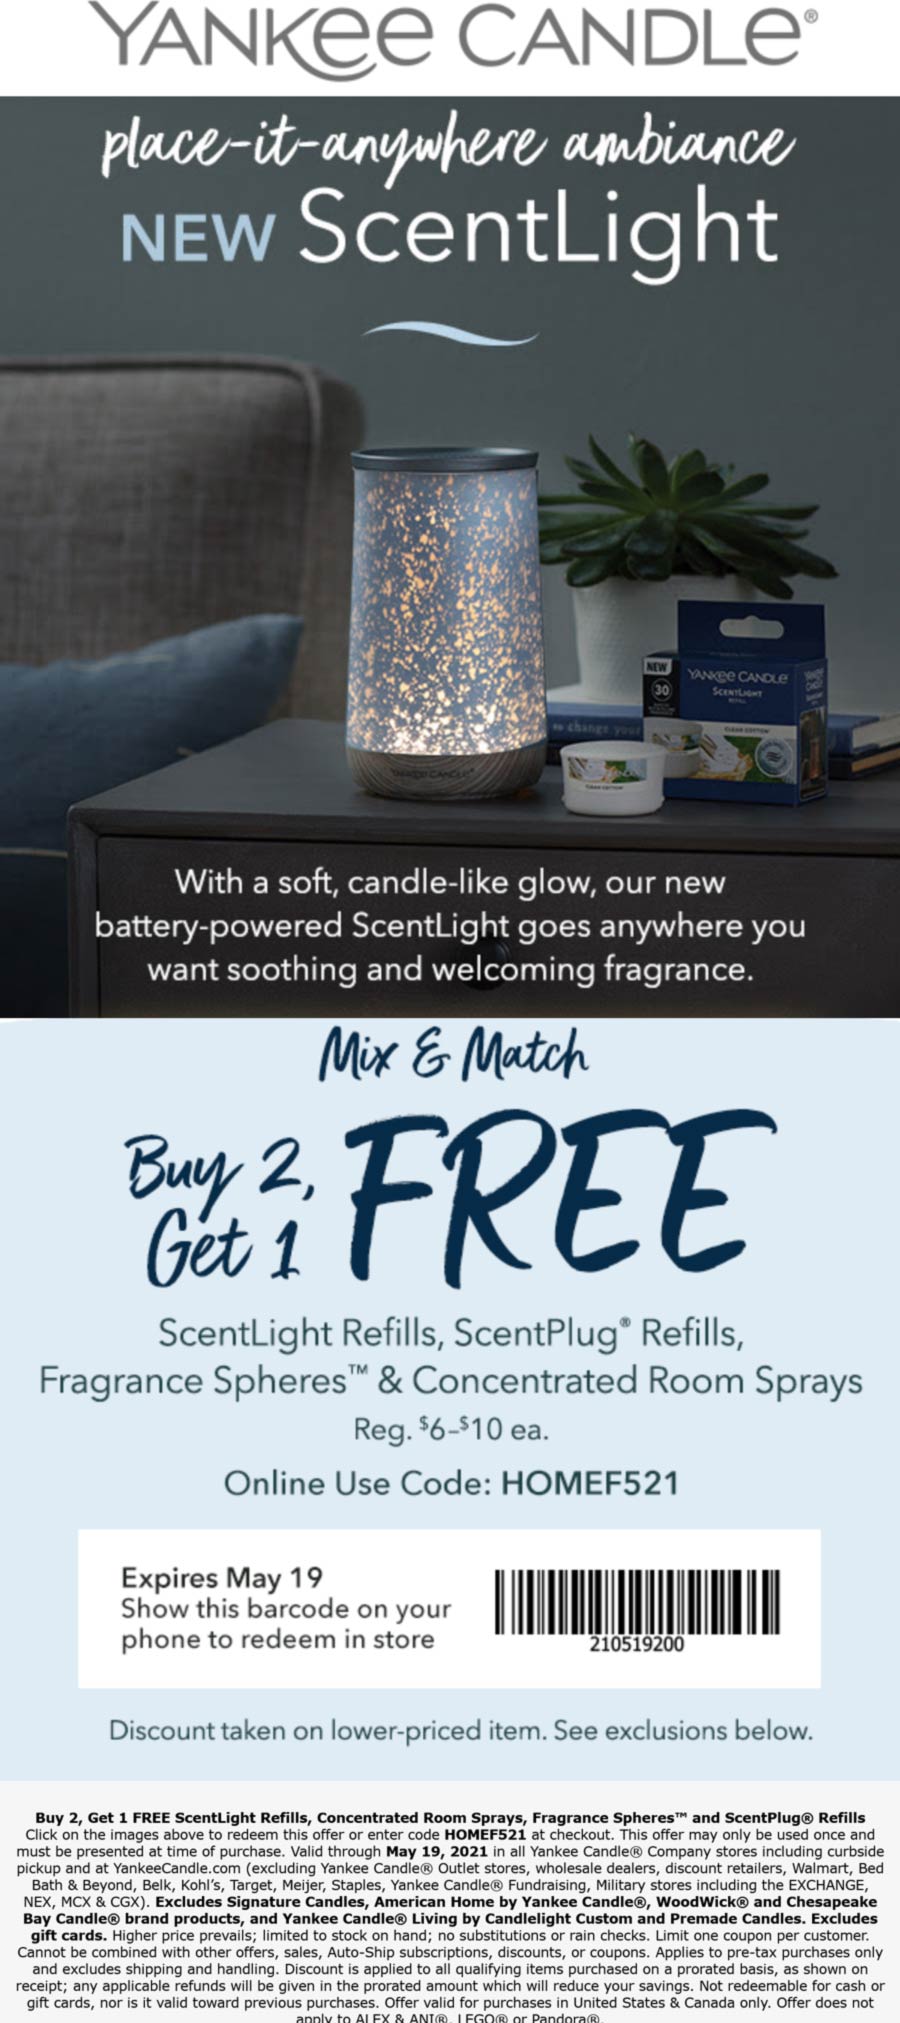 Yankee Candle stores Coupon  3rd room spray or refill free at Yankee Candle, or online via promo code HOMEF521 #yankeecandle 